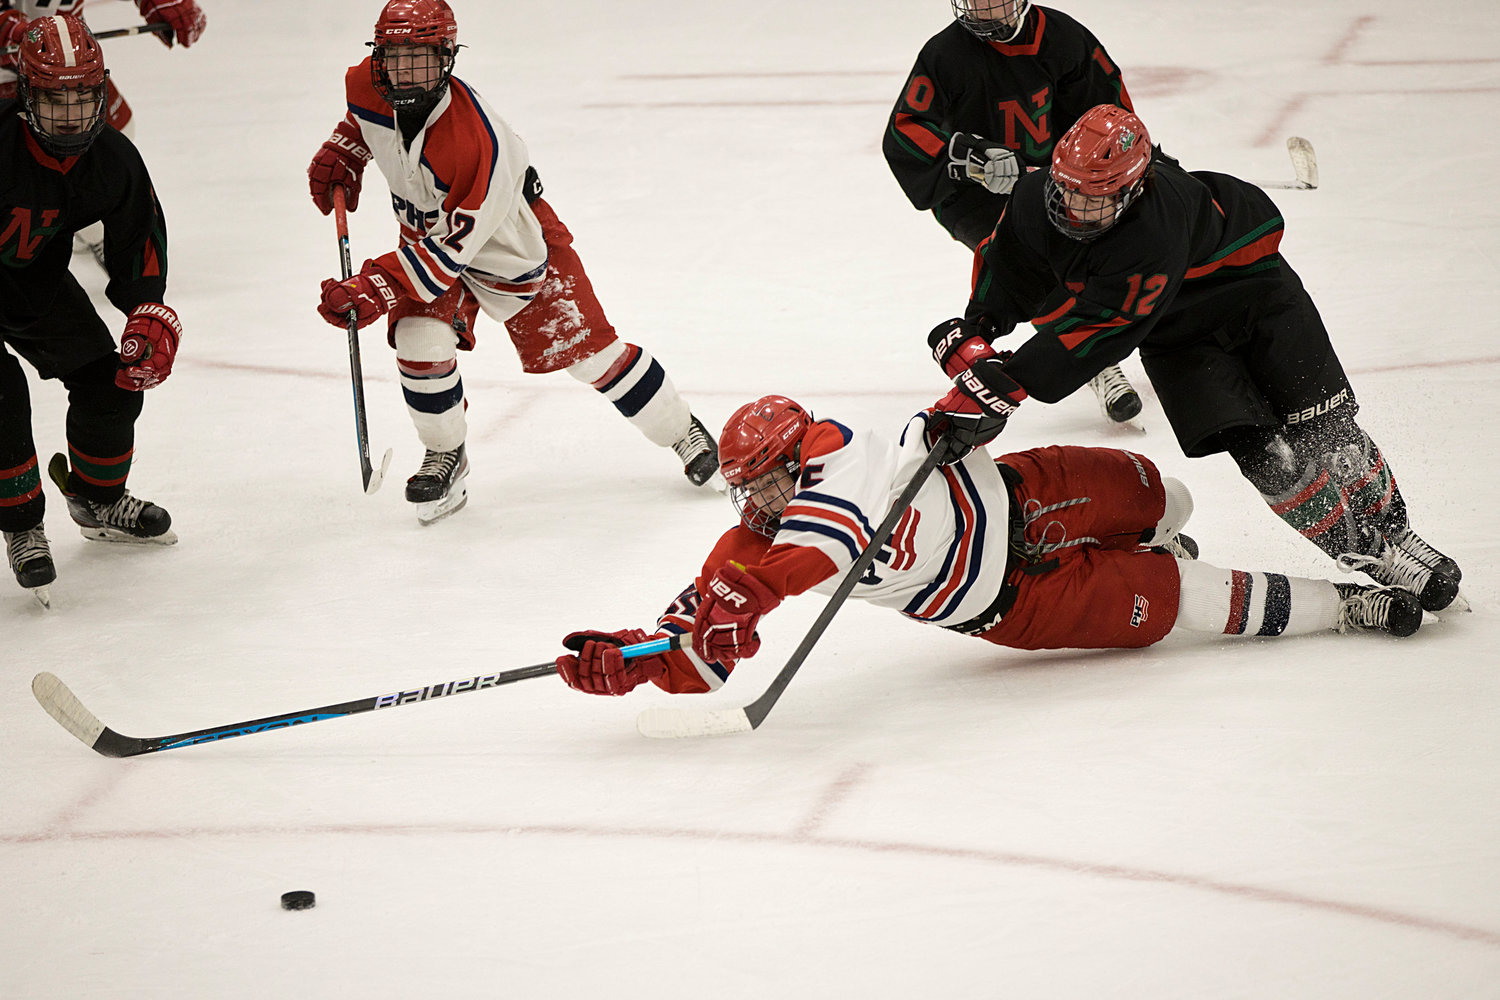 Finn O’Connor reaches for the puck after colliding with a Narragansett opponent.